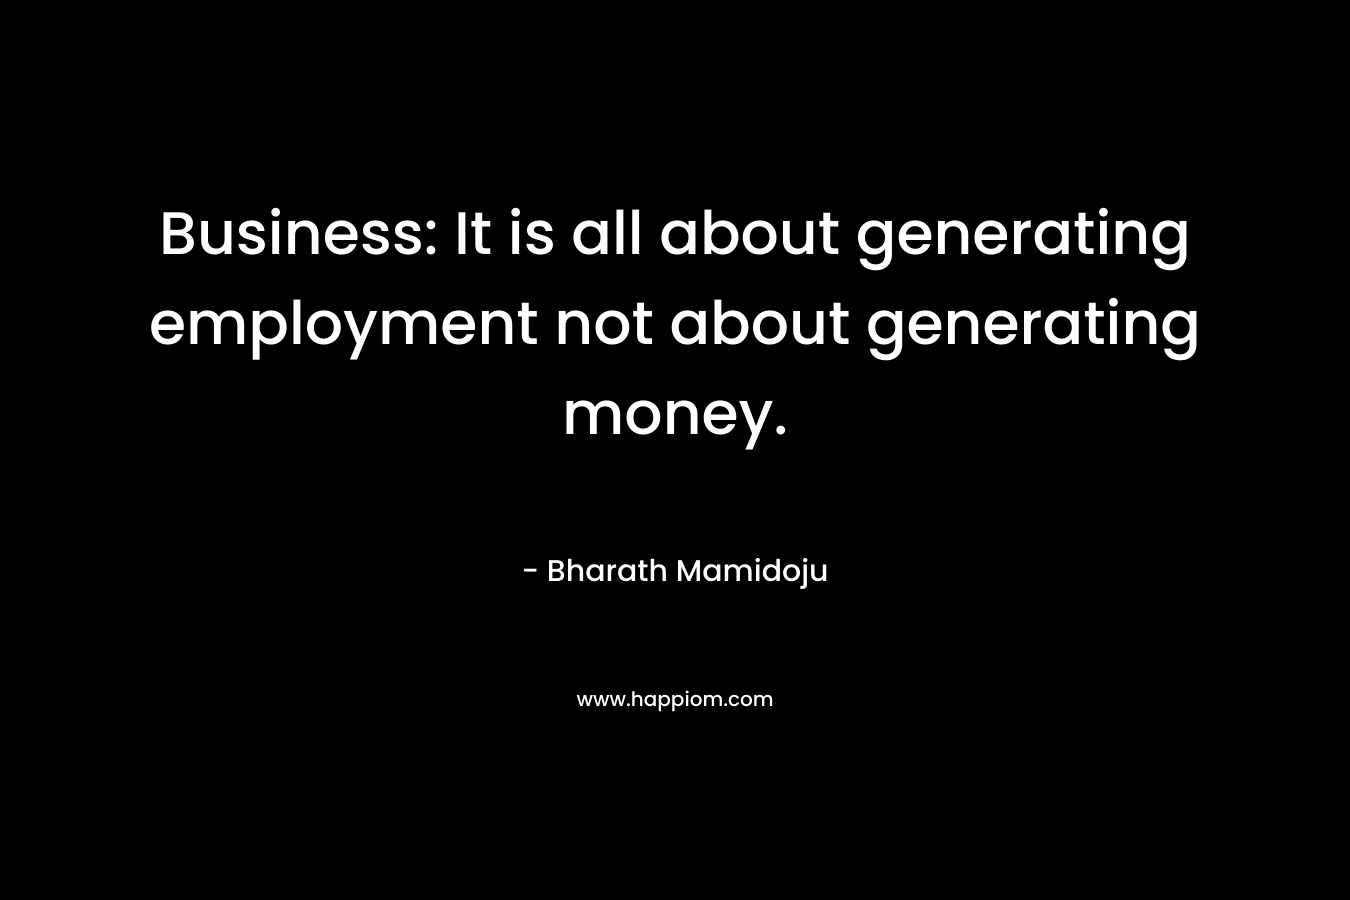 Business: It is all about generating employment not about generating money.